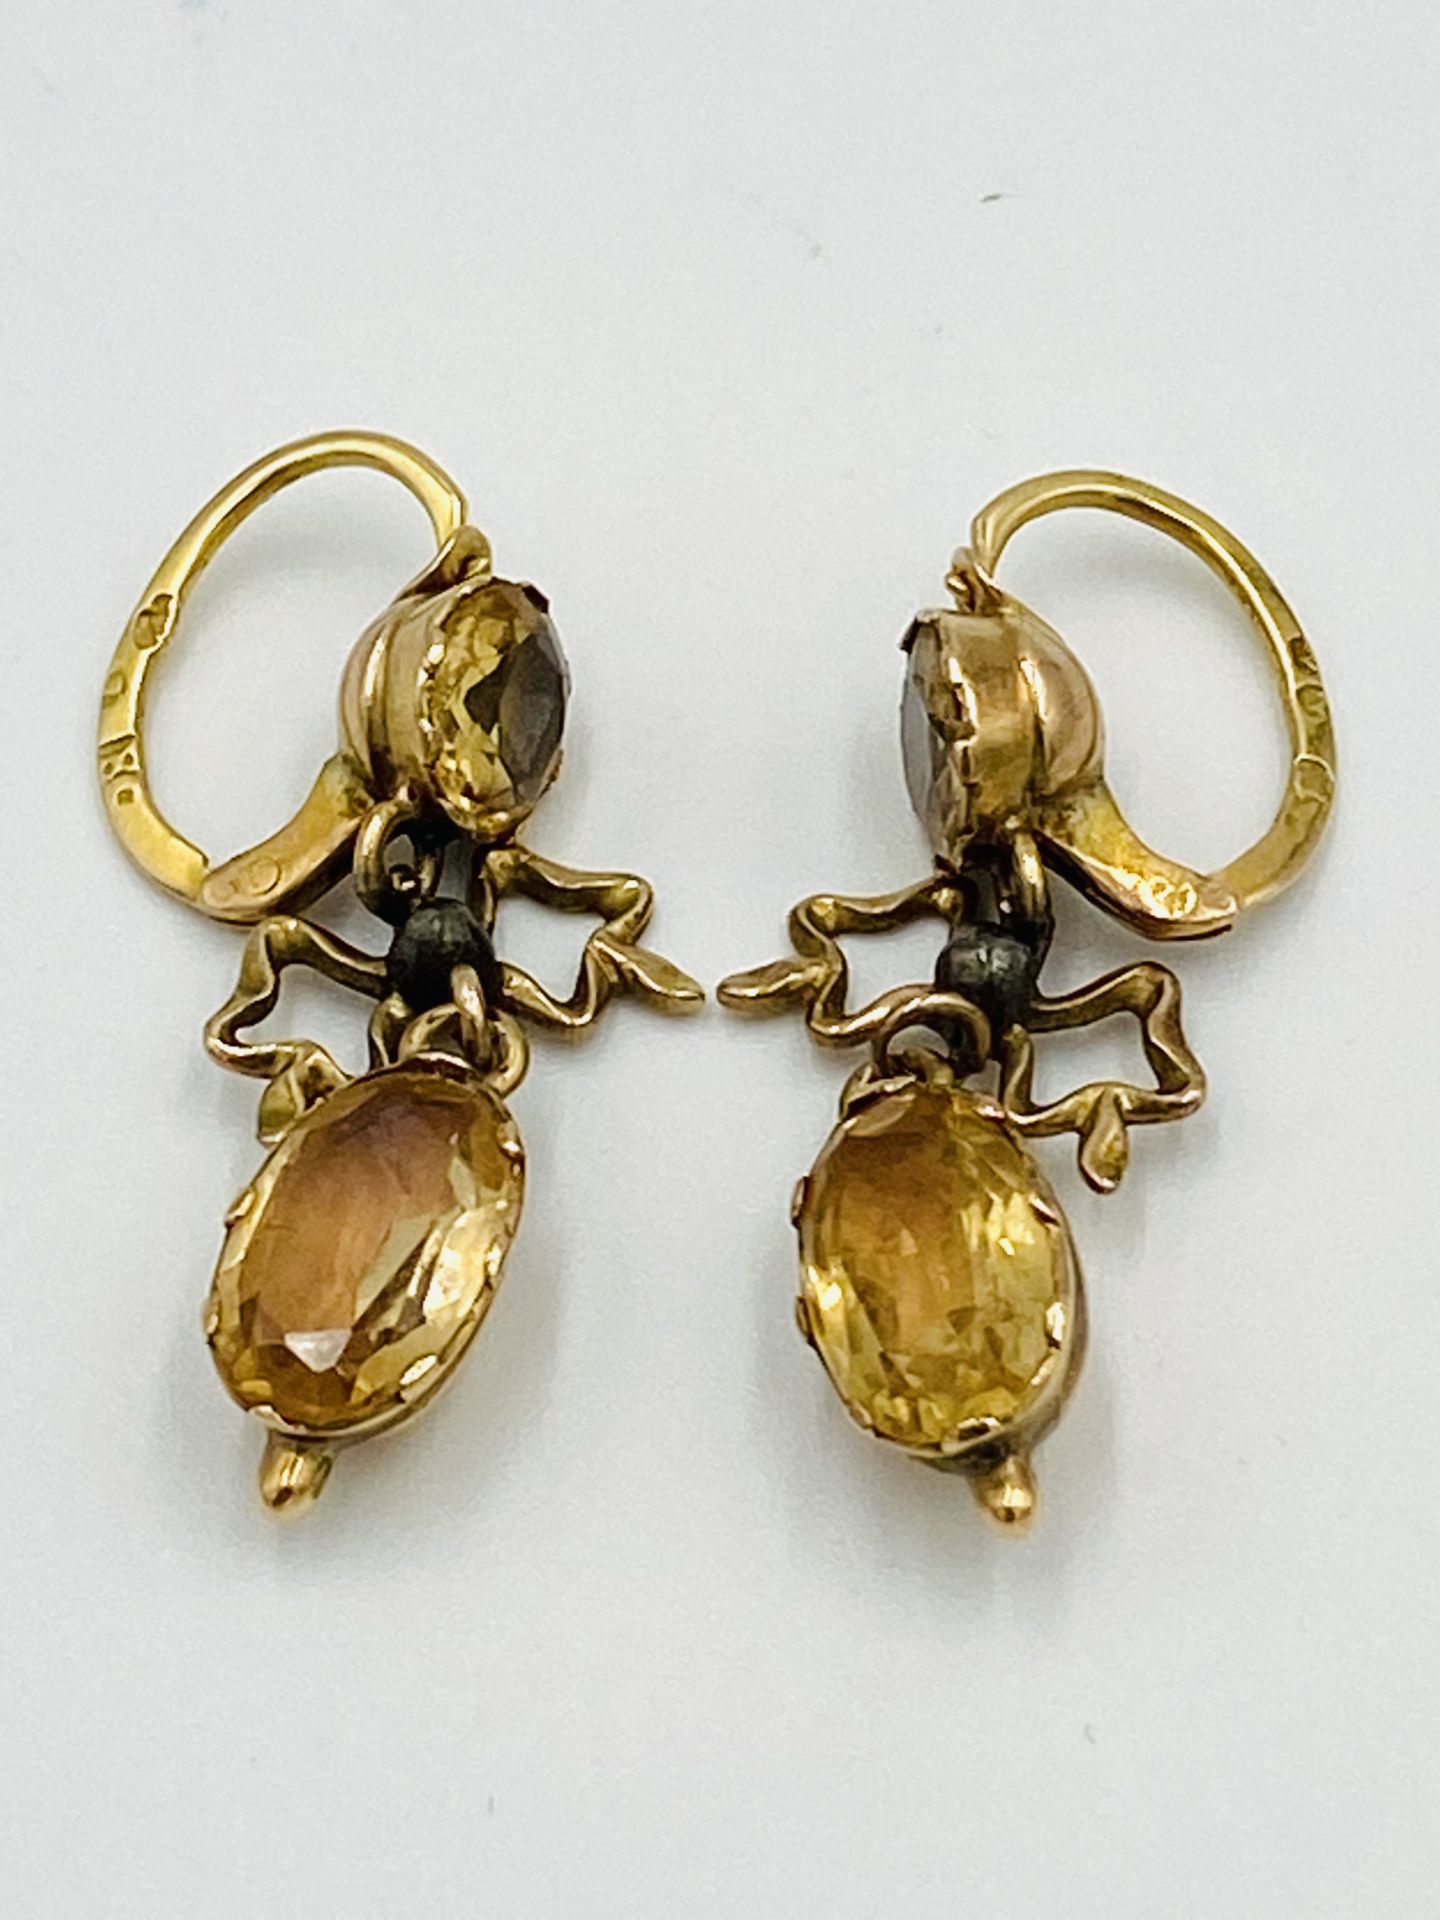 19ct century 18ct gold and topaz drop earrings - Image 2 of 9